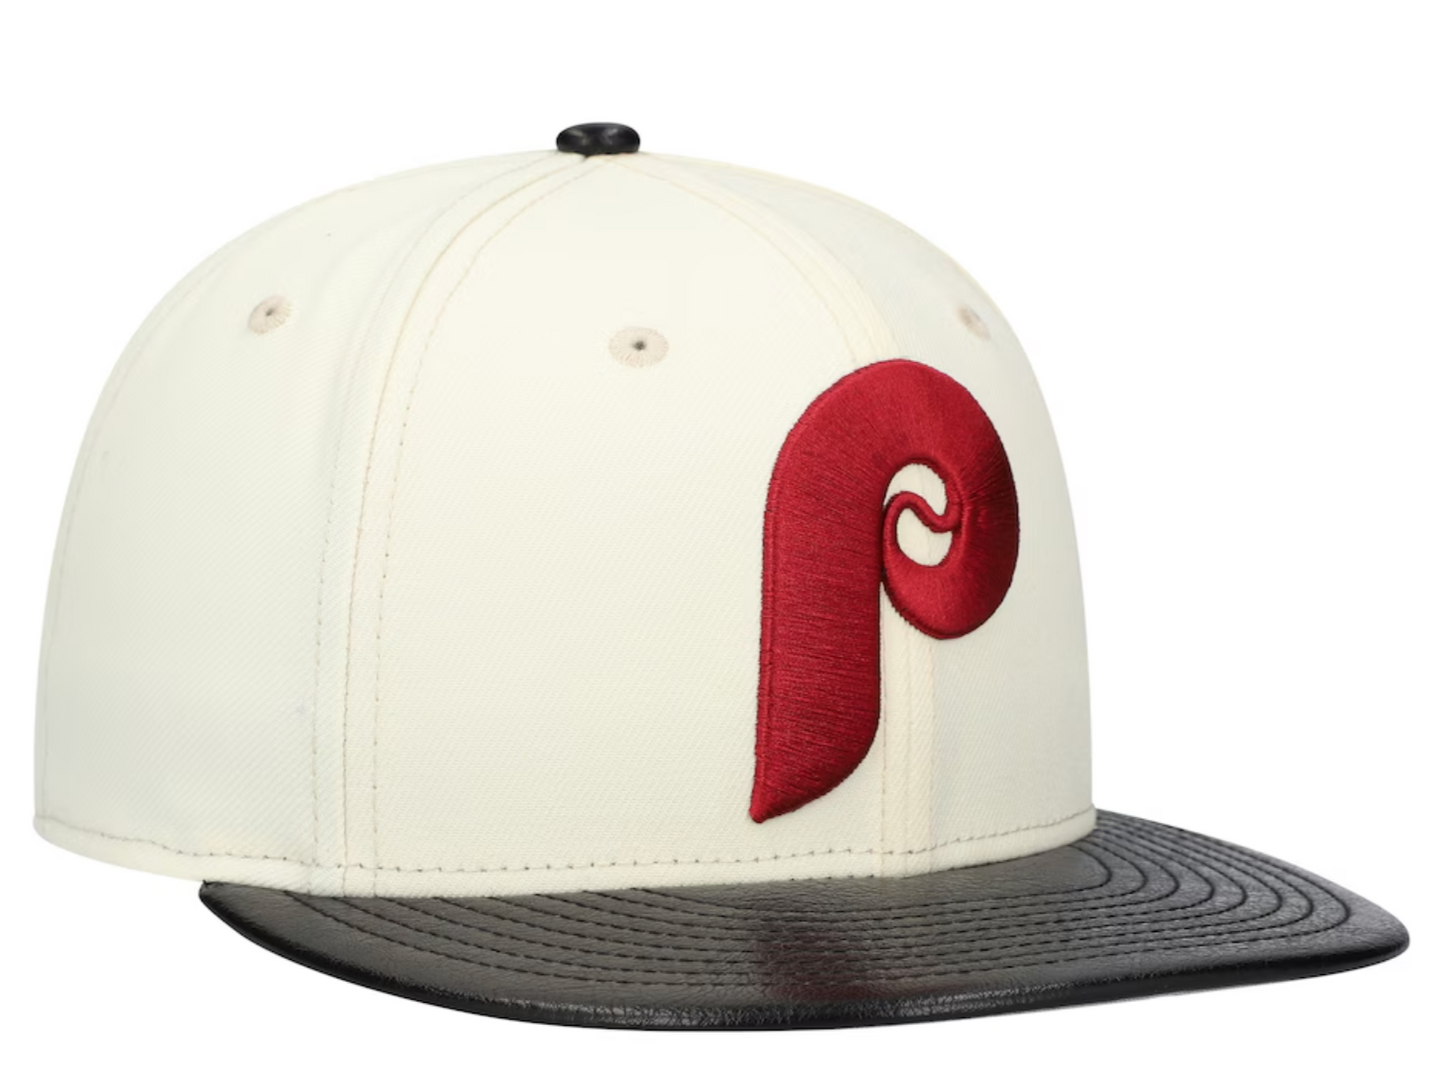 Philadelphia Phillies Cooperstown Collection Cream/Black Leather Visor New Era 59FIFTY Fitted Hat